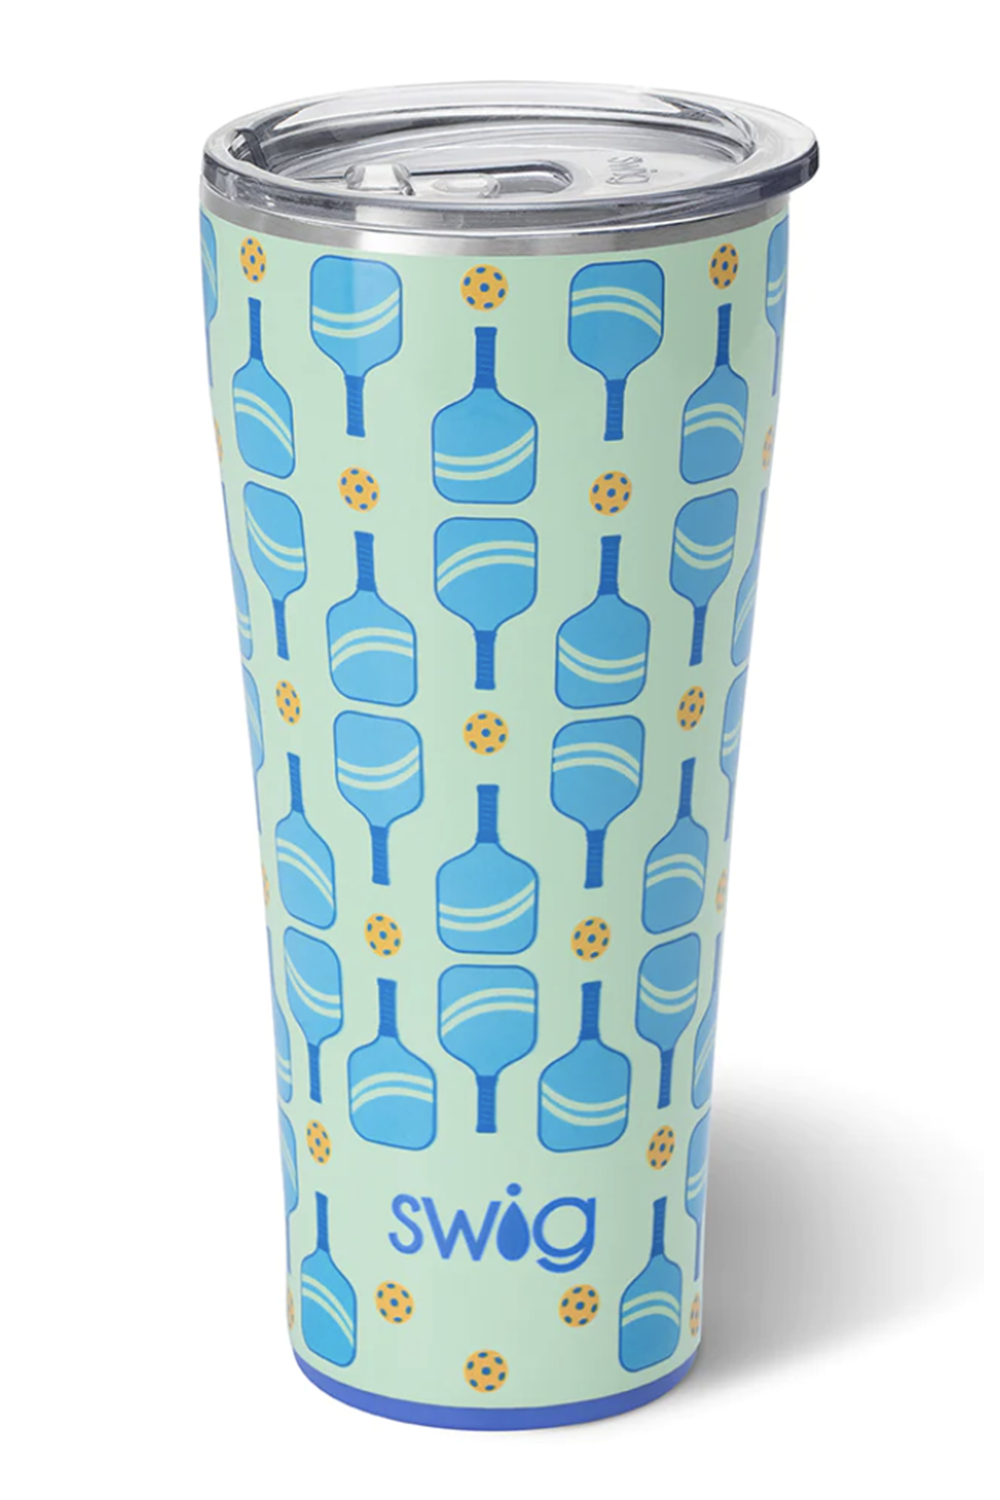 It's Swell - White - Pickleball Stainless Steel Wine Tumbler 12oz by Dizzy  Pickle